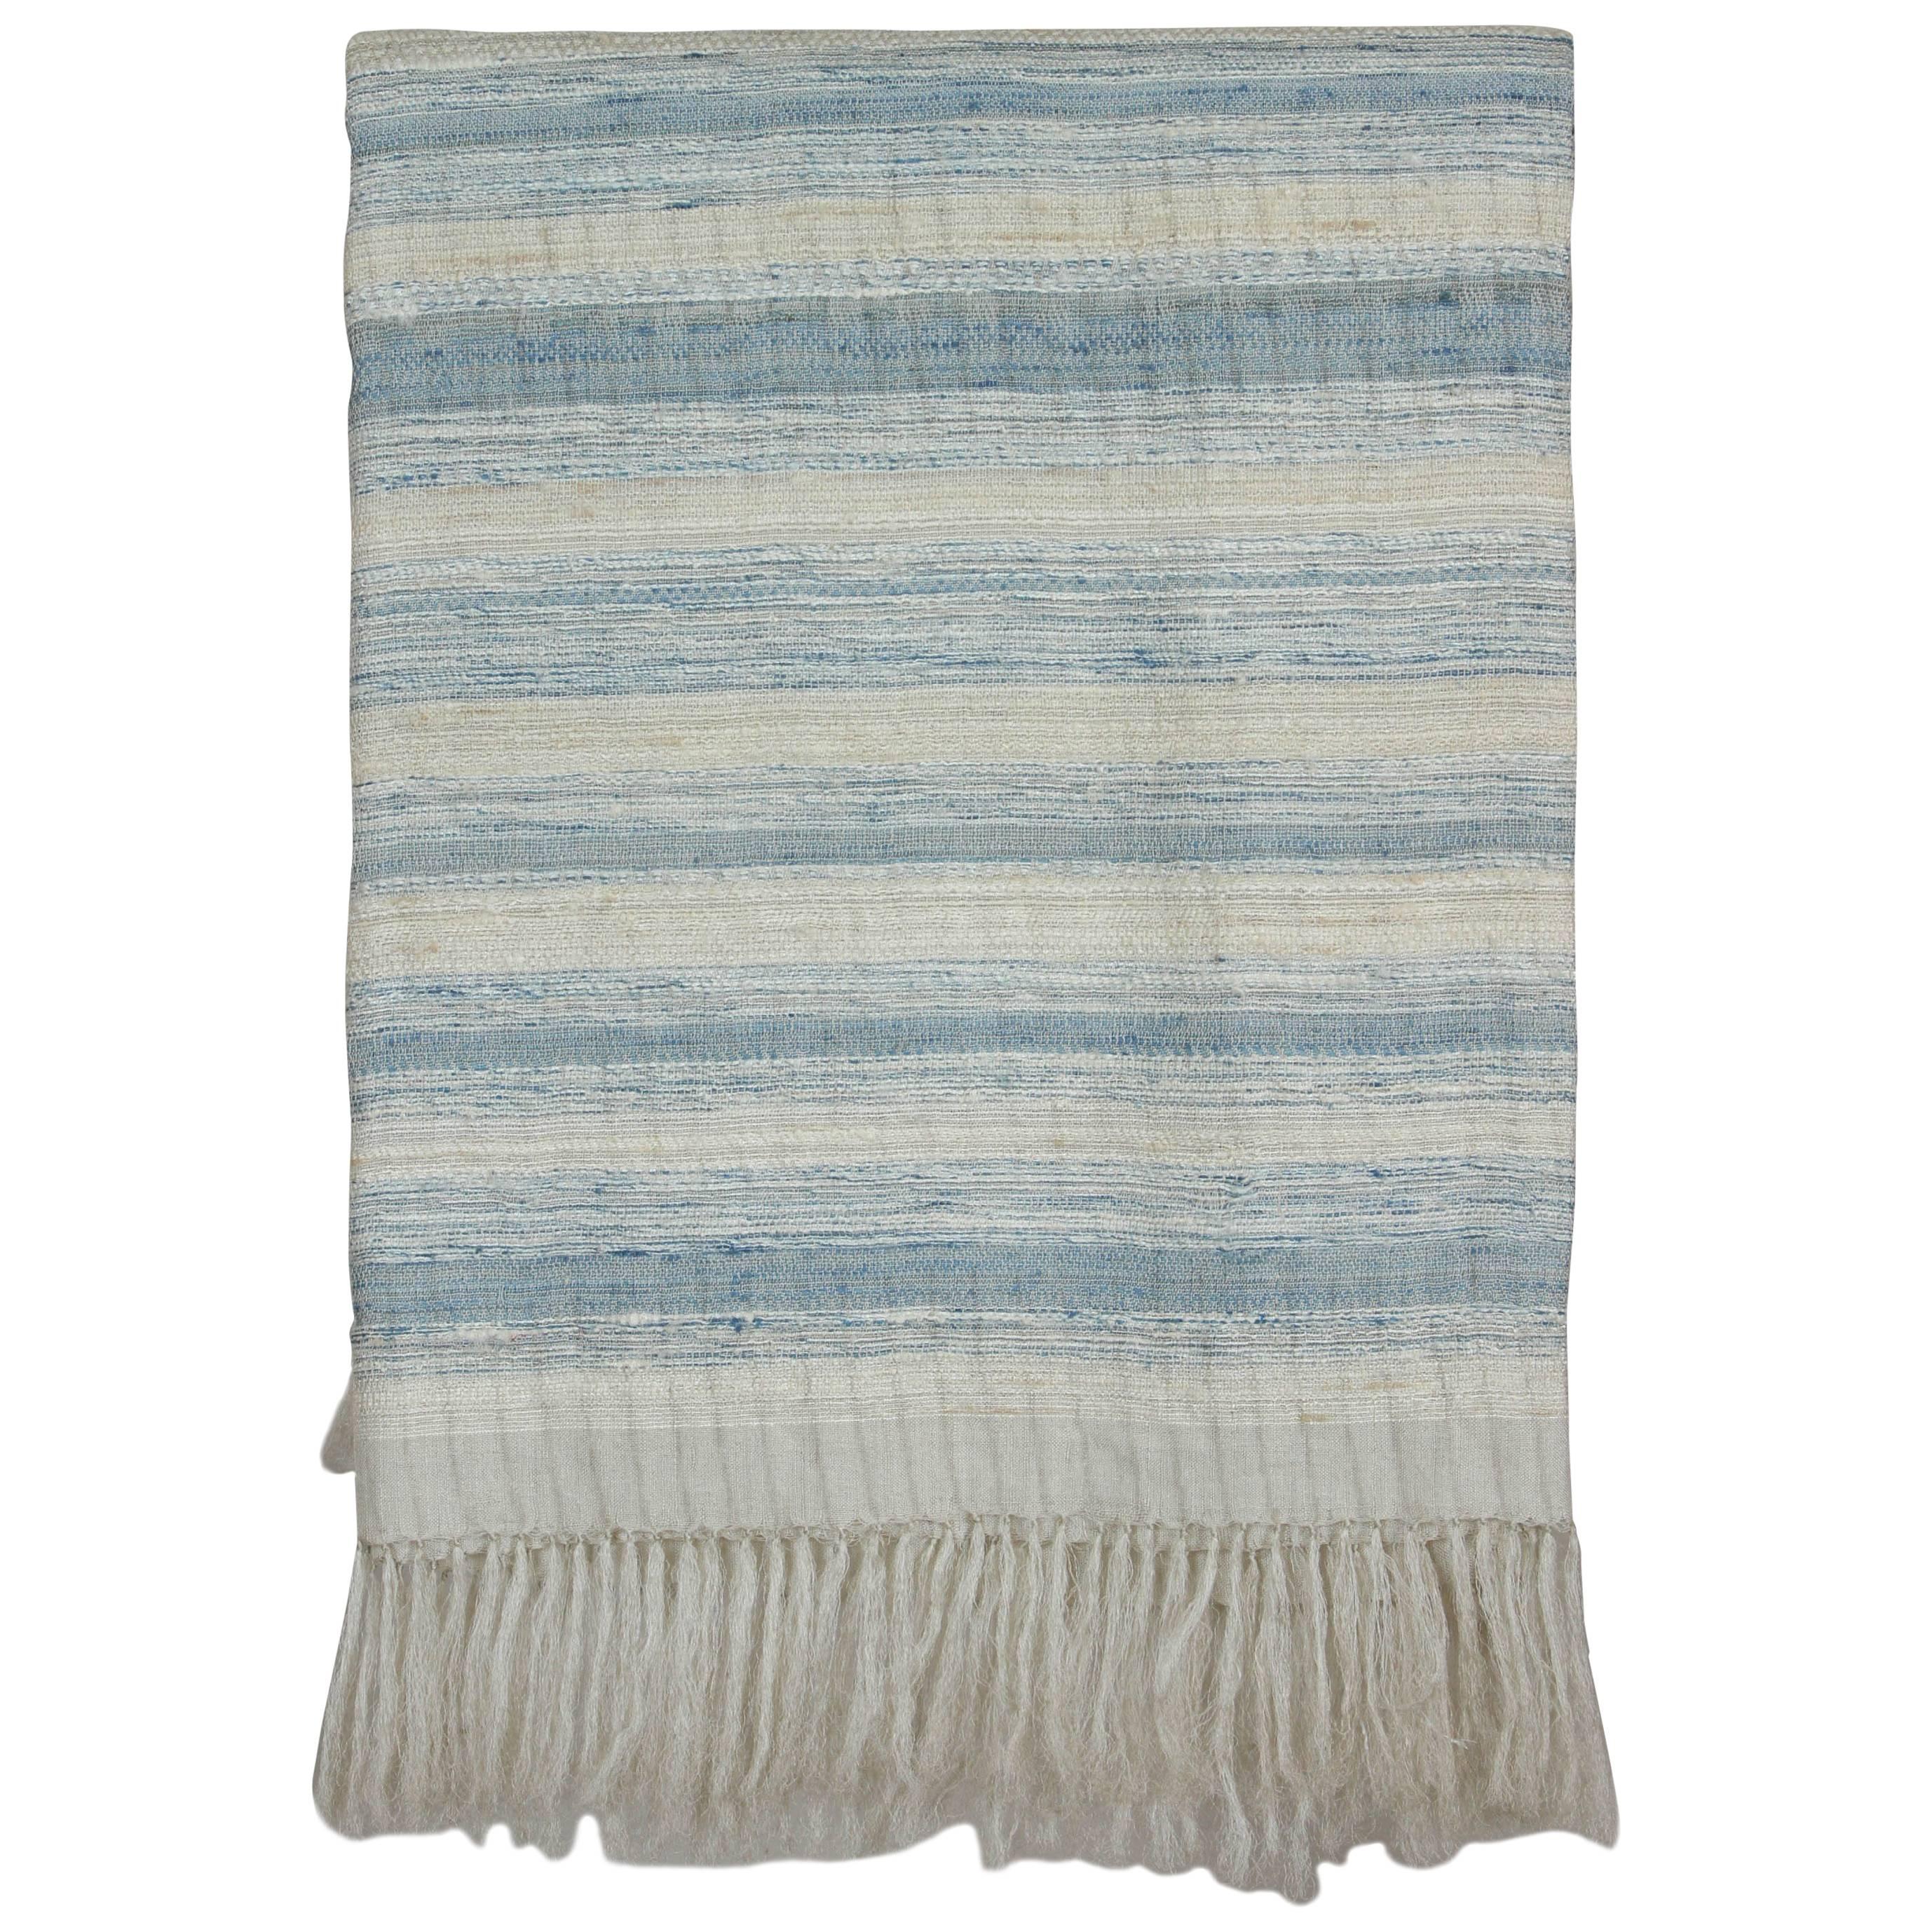 Indian Handwoven Throw, Blue and White Stripes,  Raw Silk.  For Sale